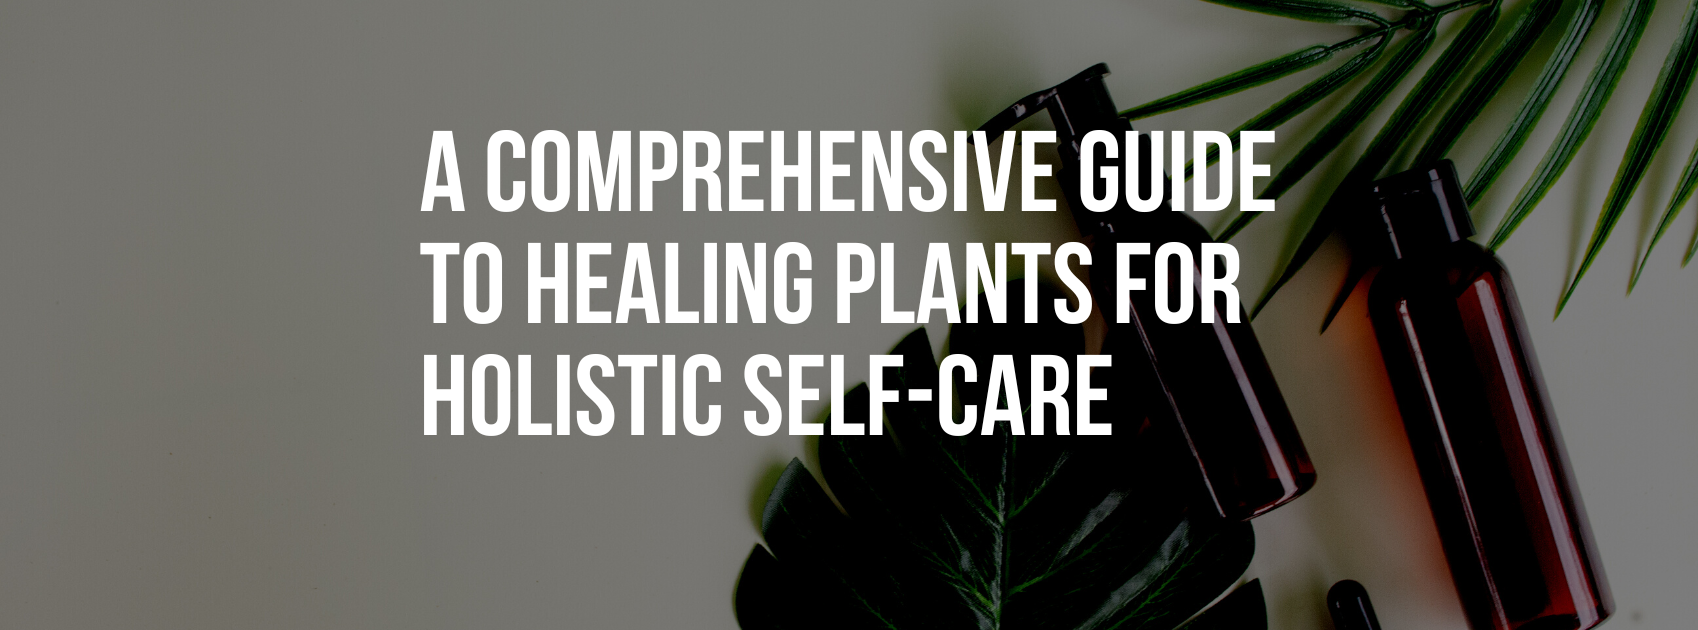 A Comprehensive Guide to Healing Plants for Holistic Self-Care